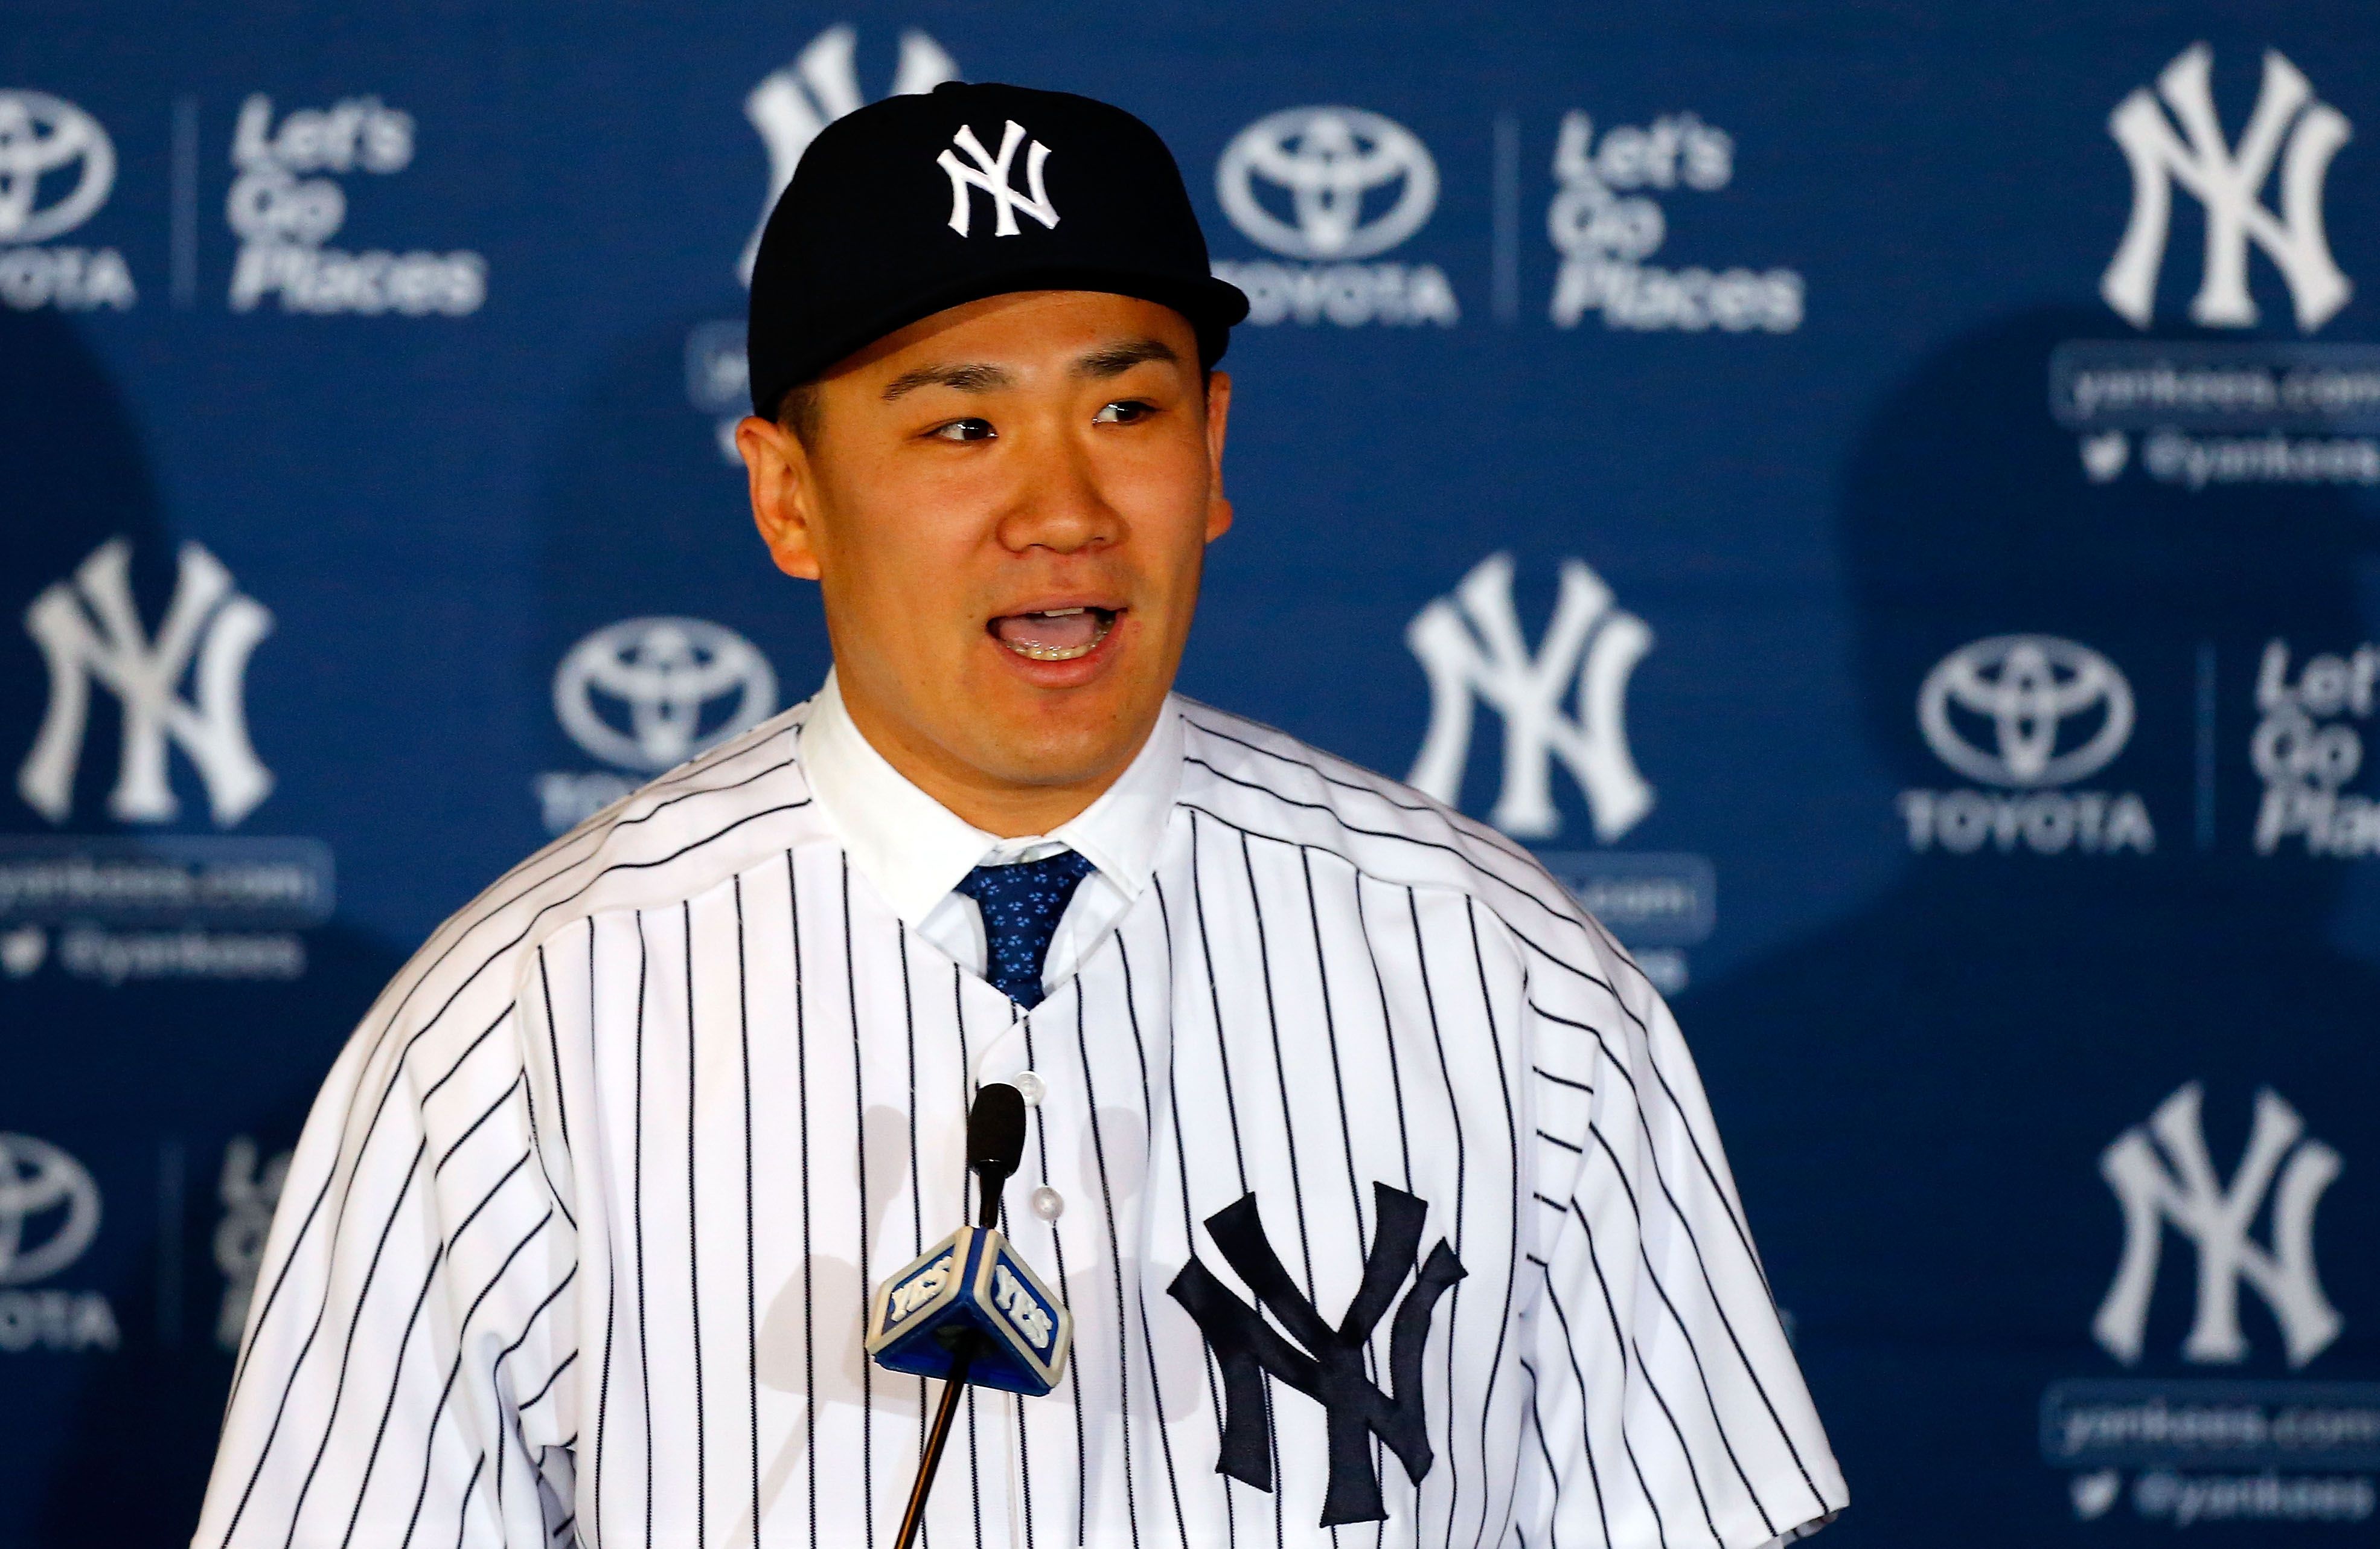 Why Yankees pitcher Masahiro Tanaka is tailor-made for the spotlight